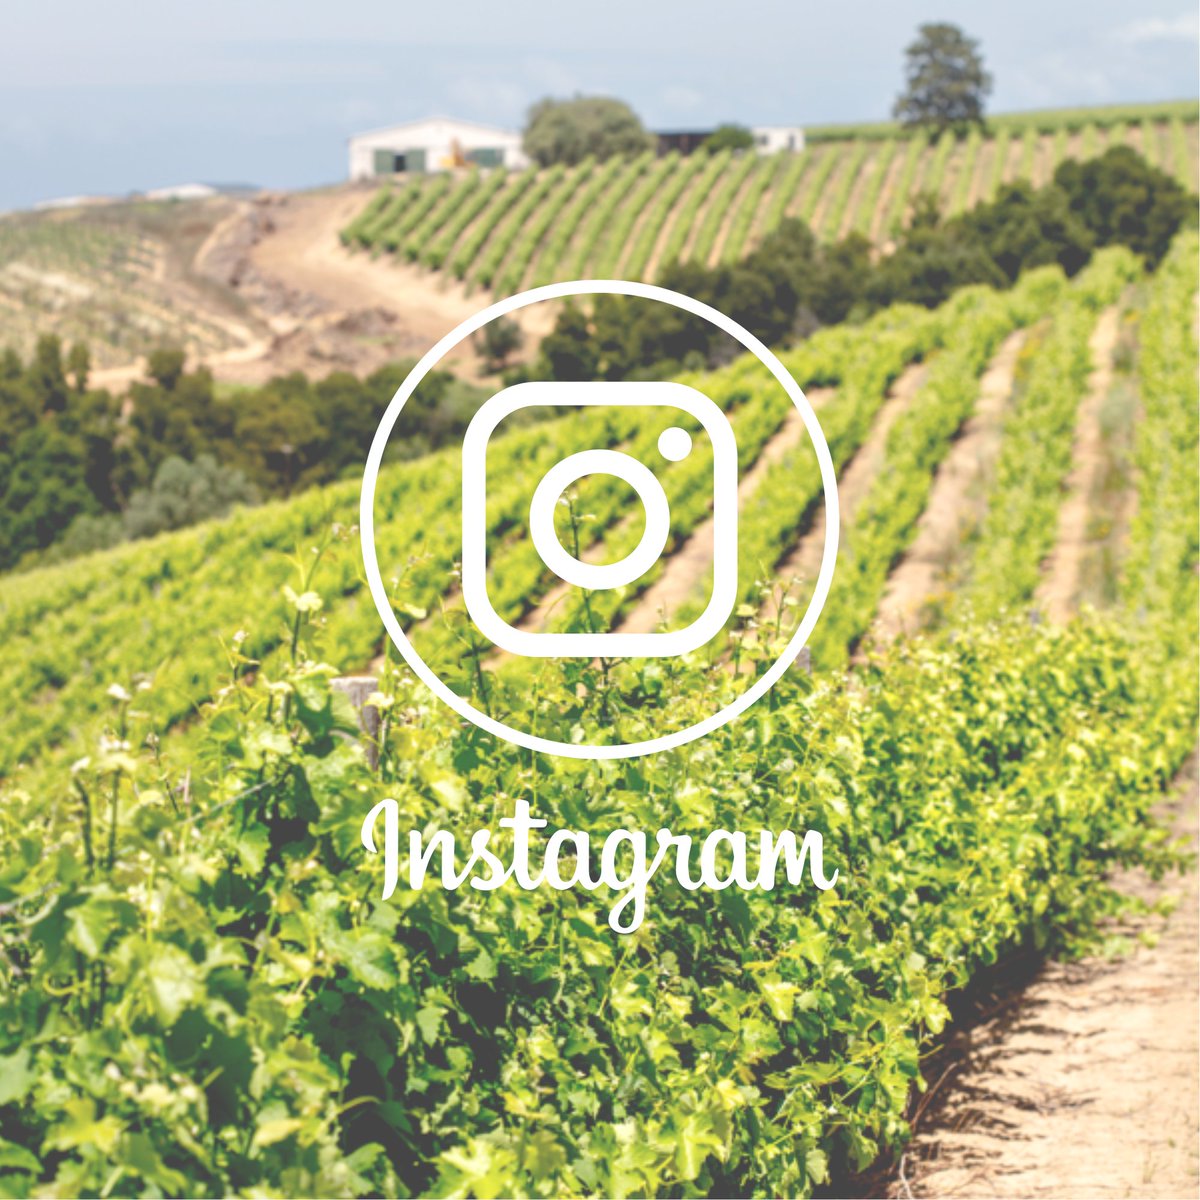 Wish I could share about Le Chant every day, but someone needs to make the wine 😉
If you want to see more about Le Chant Wines, go follow us on Instagram as well 🍷
@Lechantwines 
#wine #lechantwines #winemaker #southafricanwine